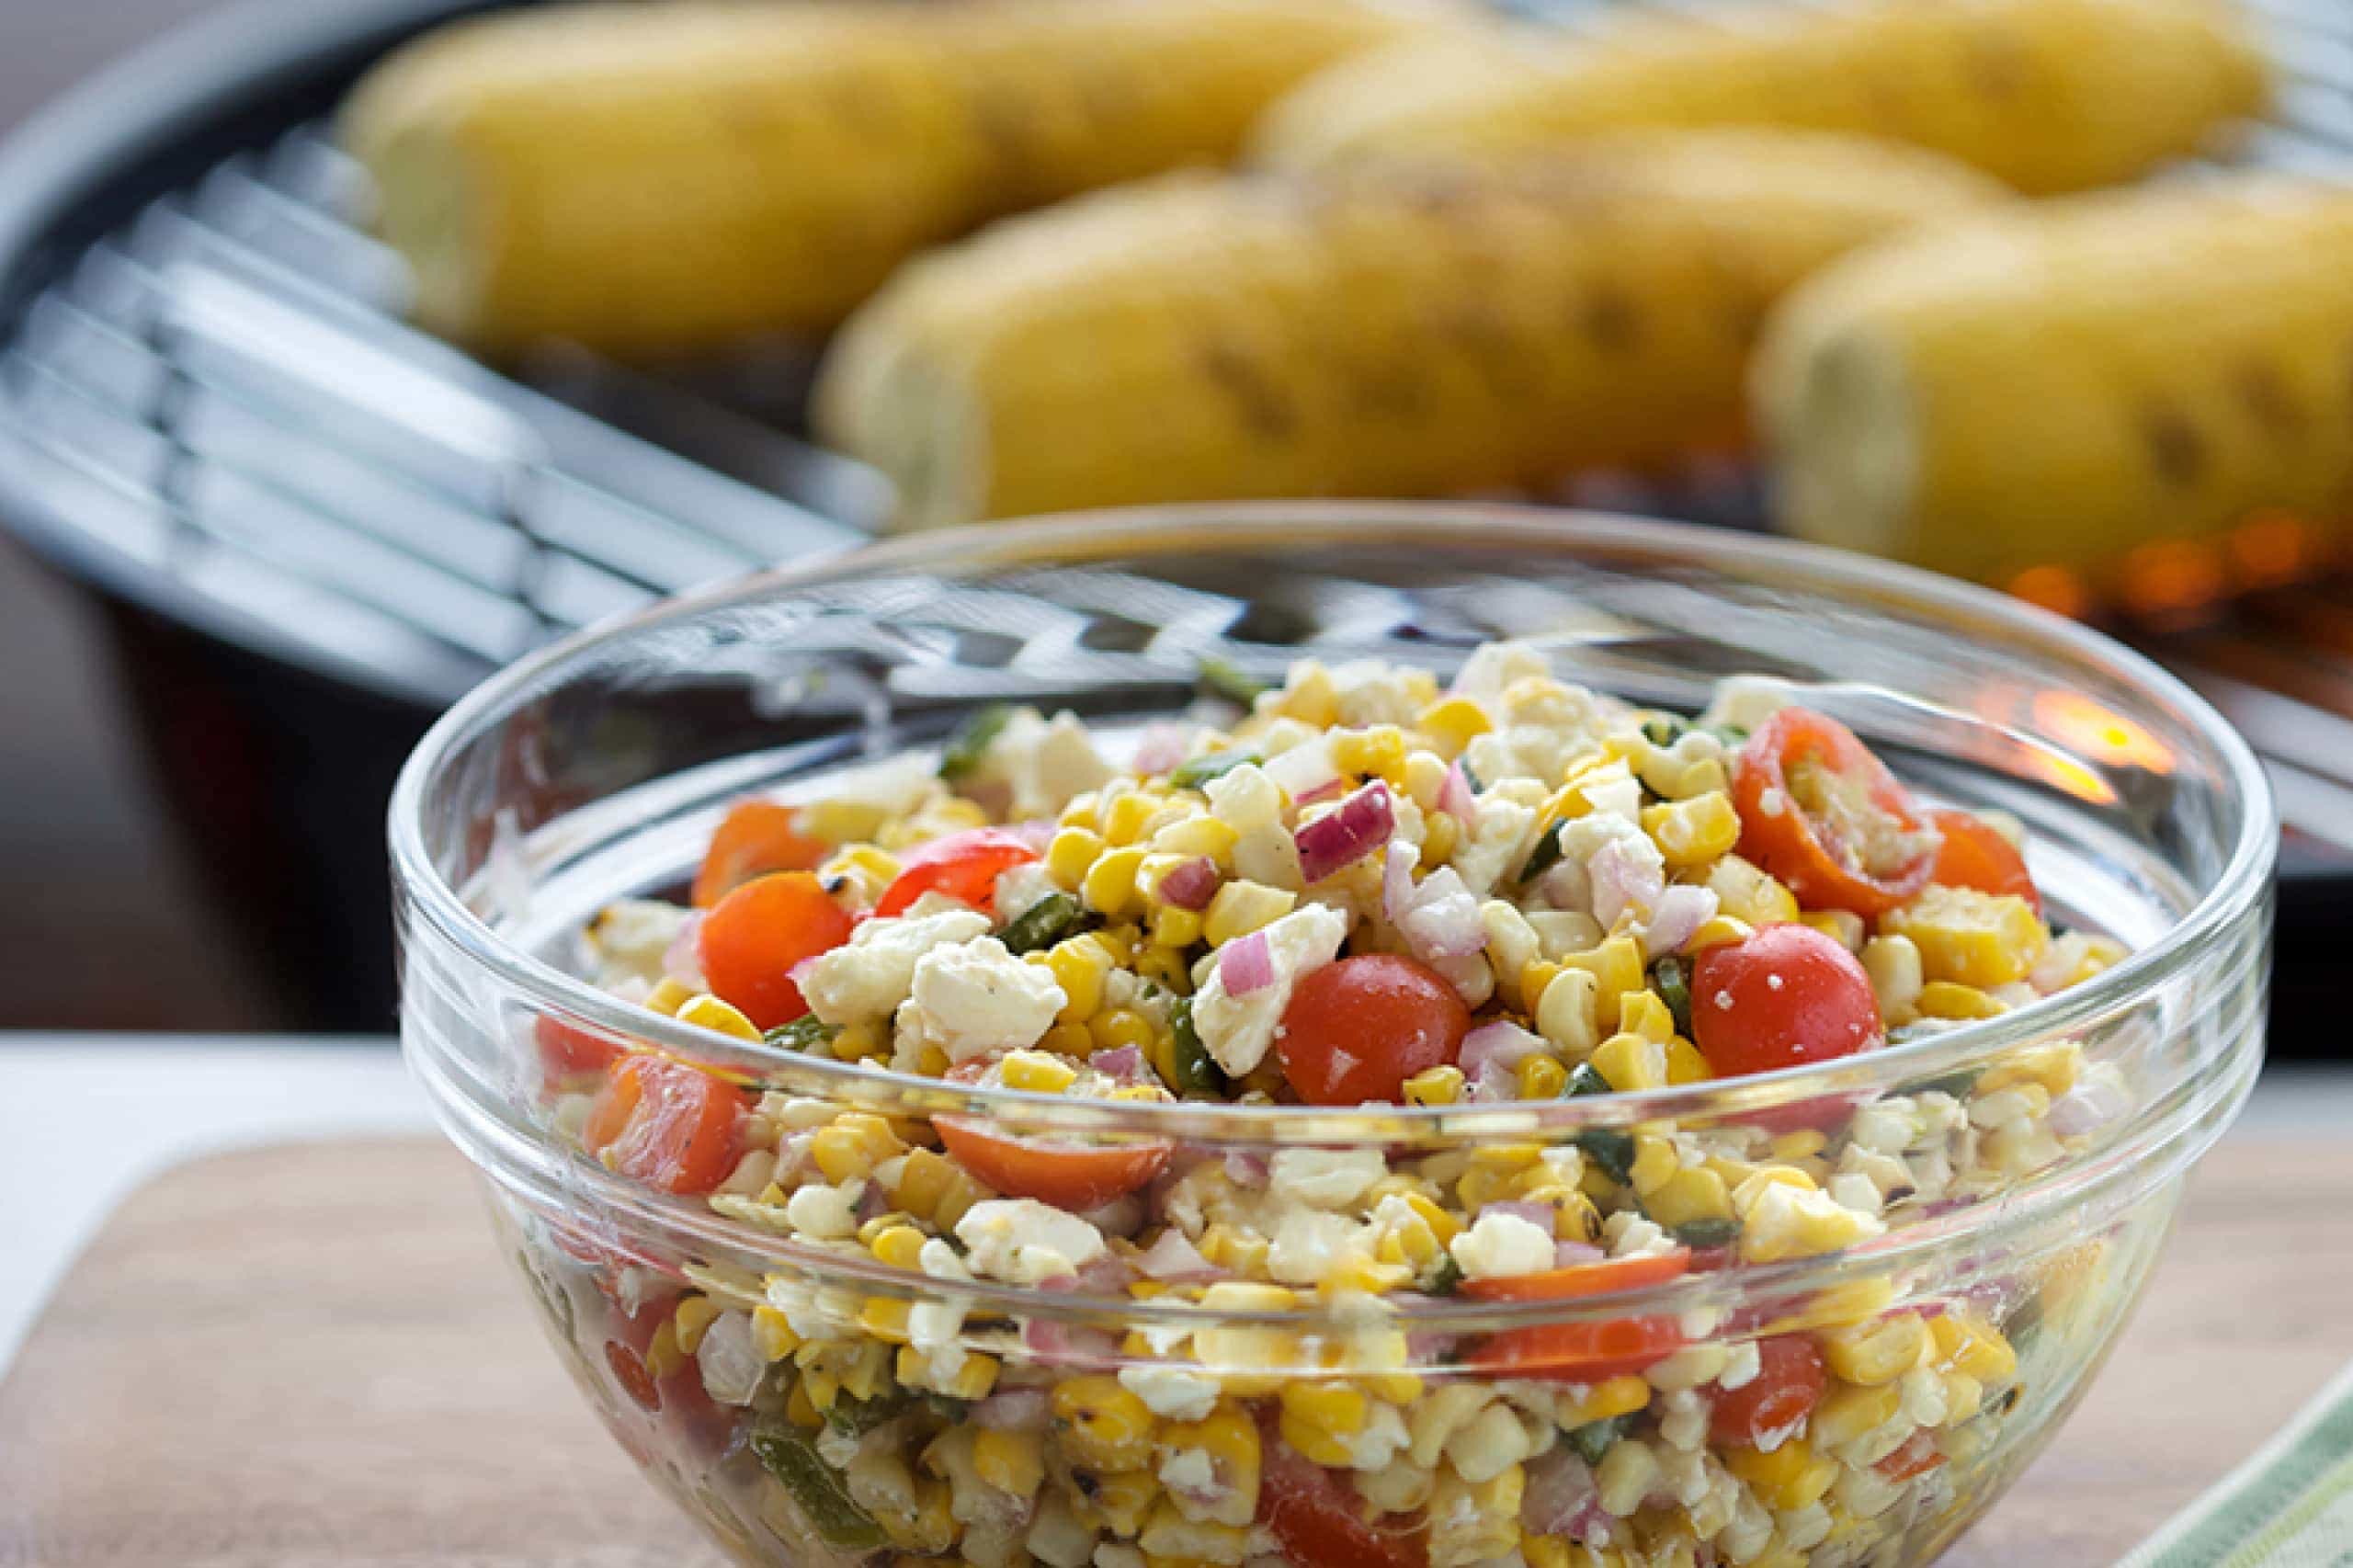 https://www.hiddenvalley.com/wp-content/uploads/2021/04/grilled-ranch-corn-salad-poblano-peppers-RDP.jpg